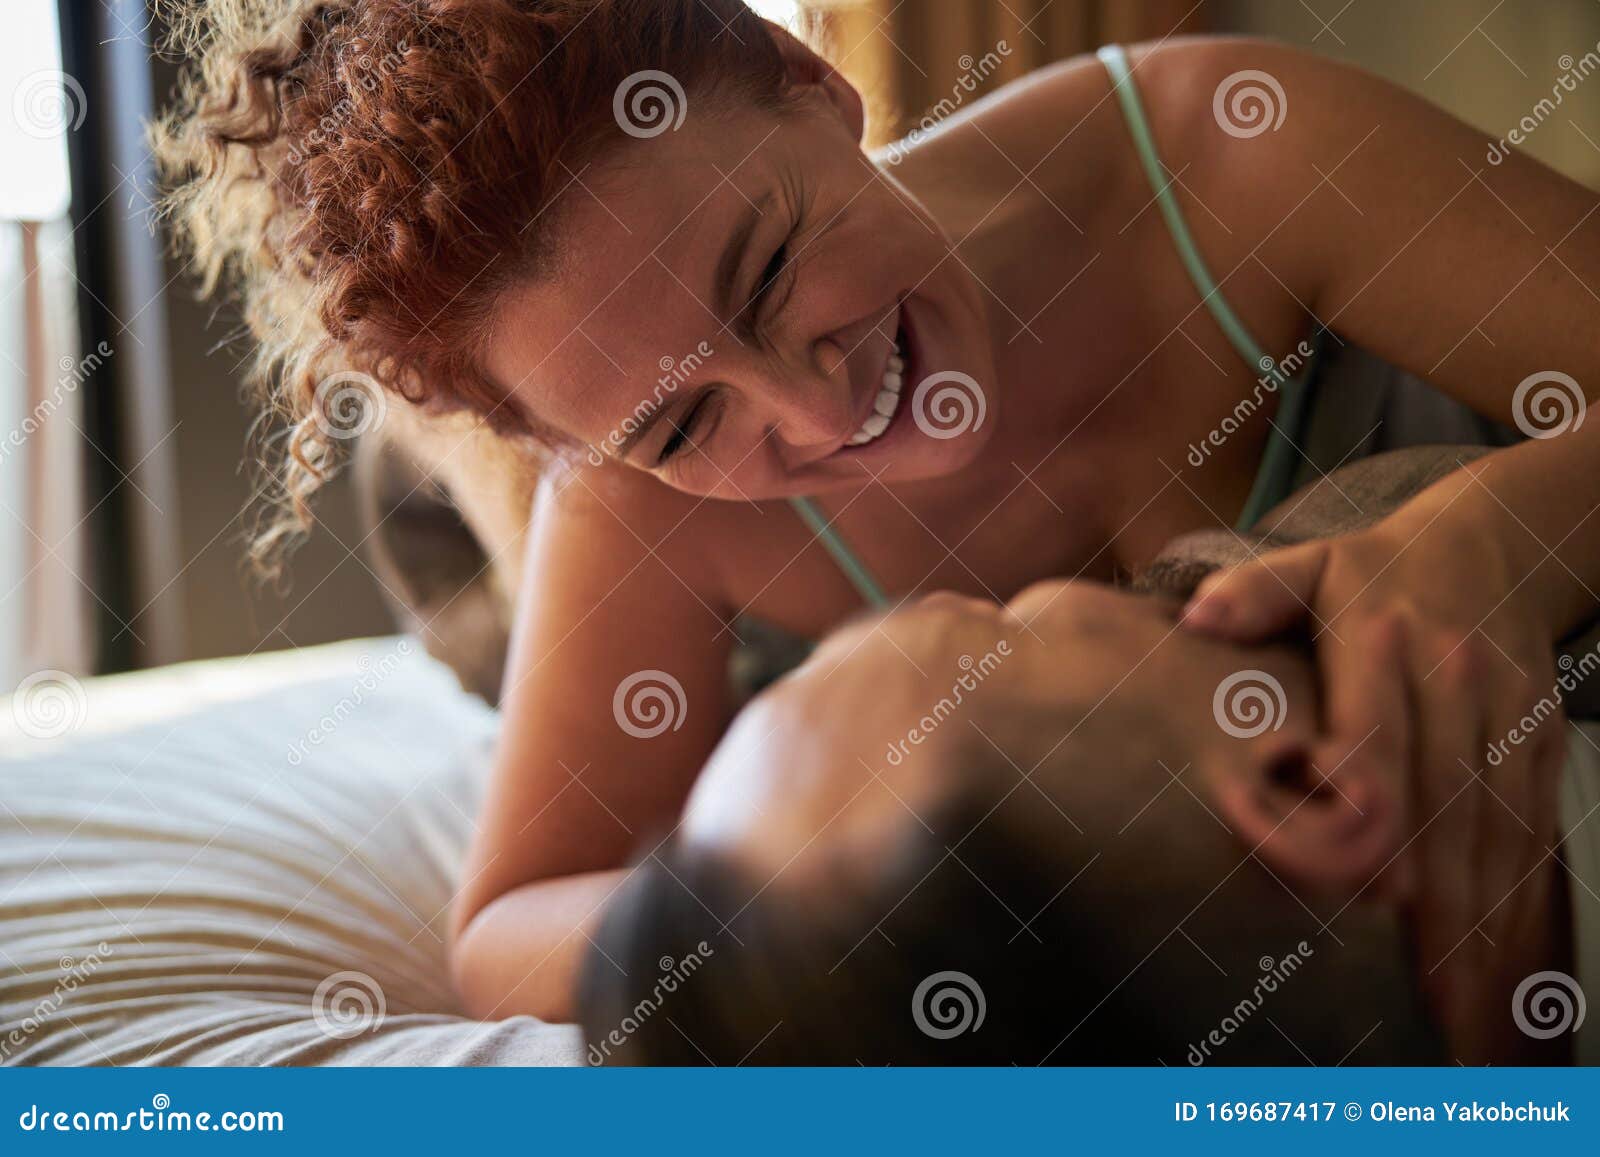 Adult Smiling Couple Getting Intimate while Lying in Bed Stock Image image photo